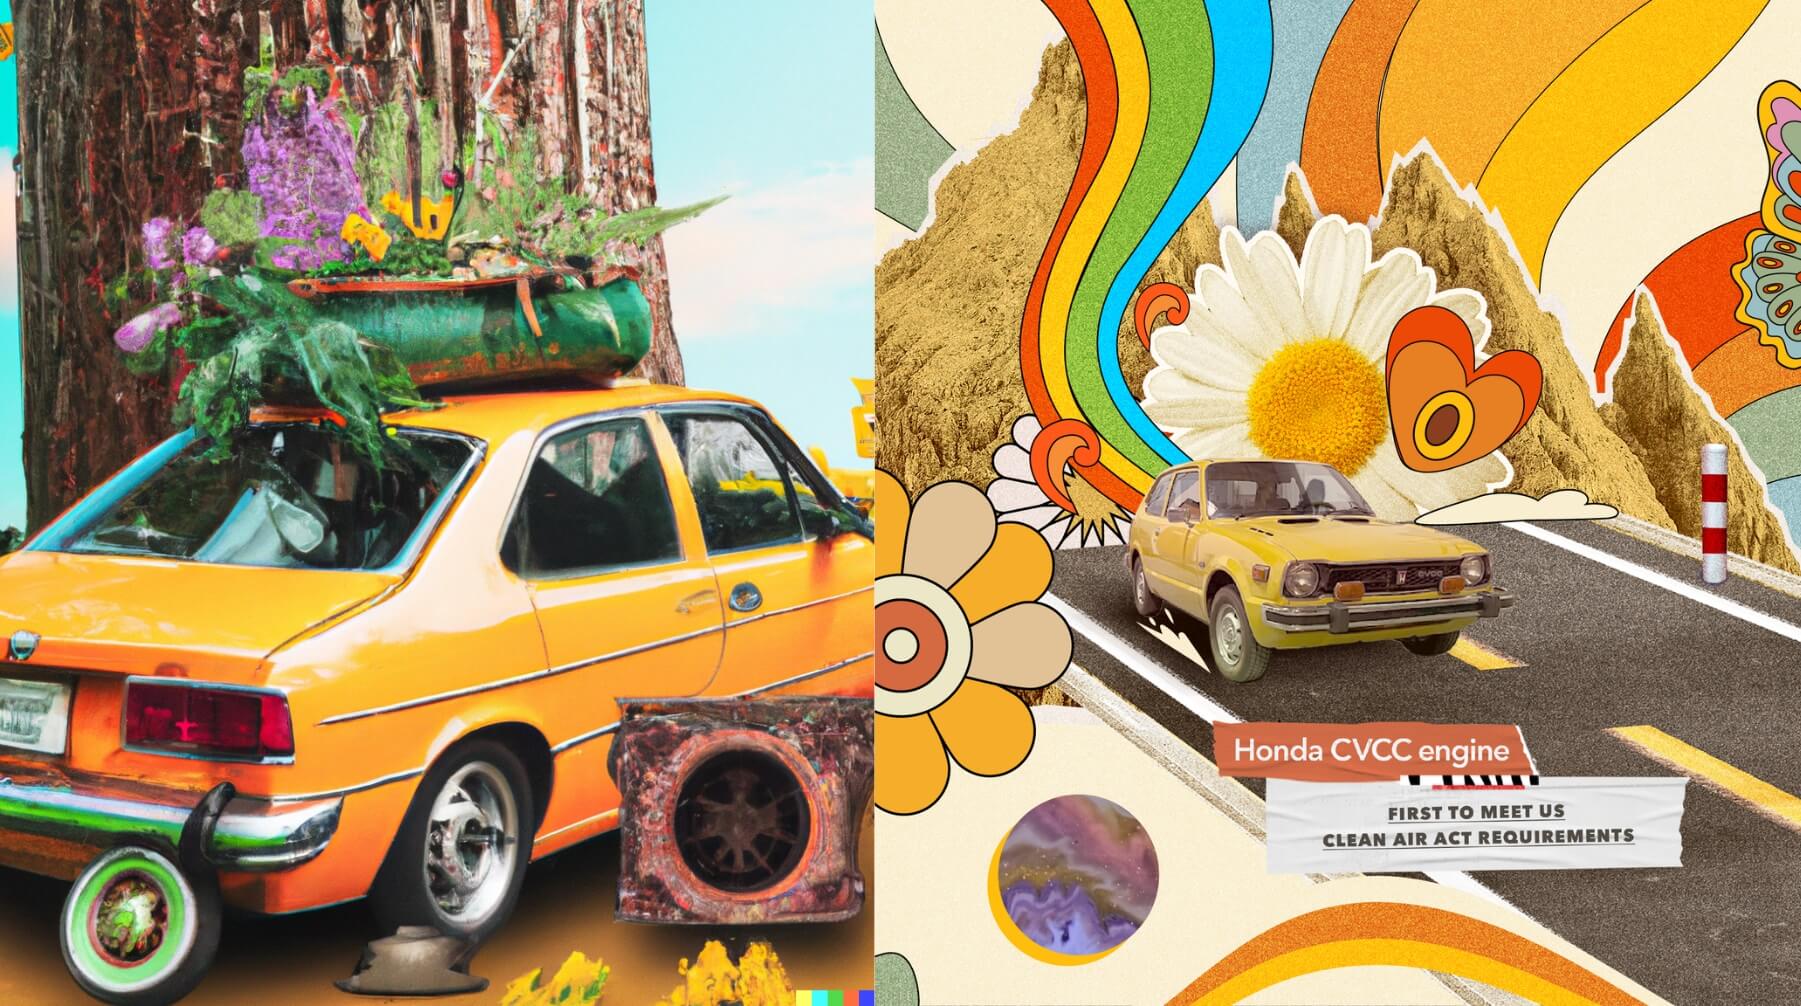 Yellow Honda Civic in old, collage style - made by AI on the left (Dall-e), and by Pigeon Studio on the right